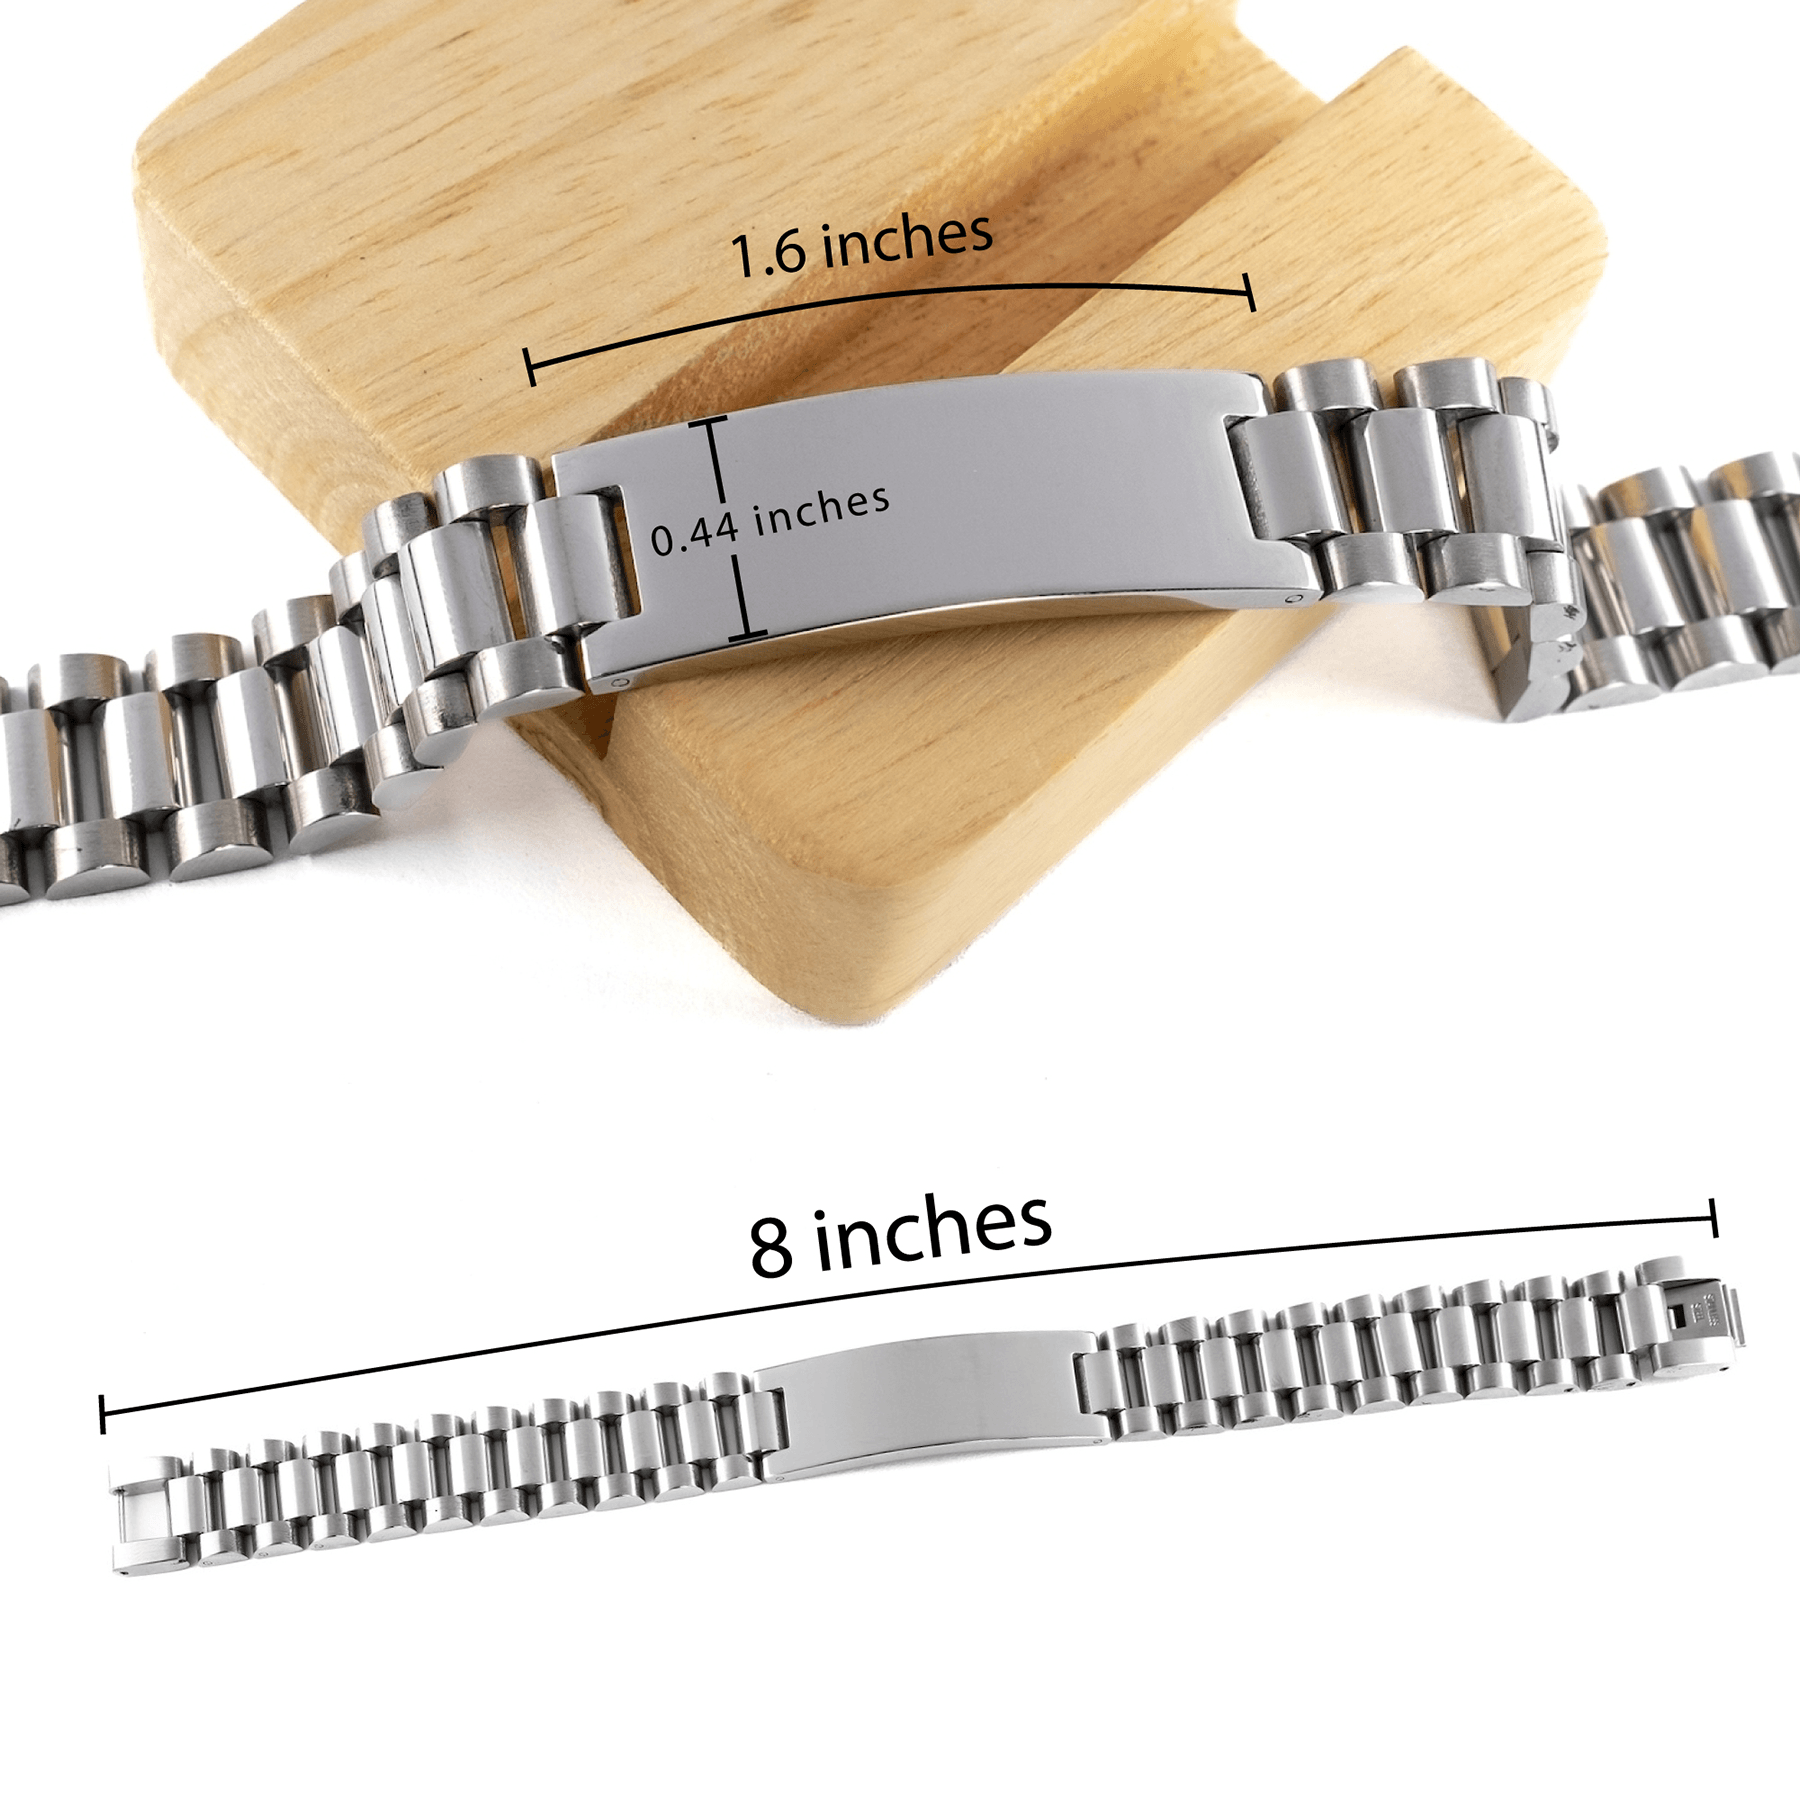 Remarkable Carpenter Gifts, Your dedication and hard work, Inspirational Birthday Christmas Unique Ladder Stainless Steel Bracelet For Carpenter, Coworkers, Men, Women, Friends - Mallard Moon Gift Shop